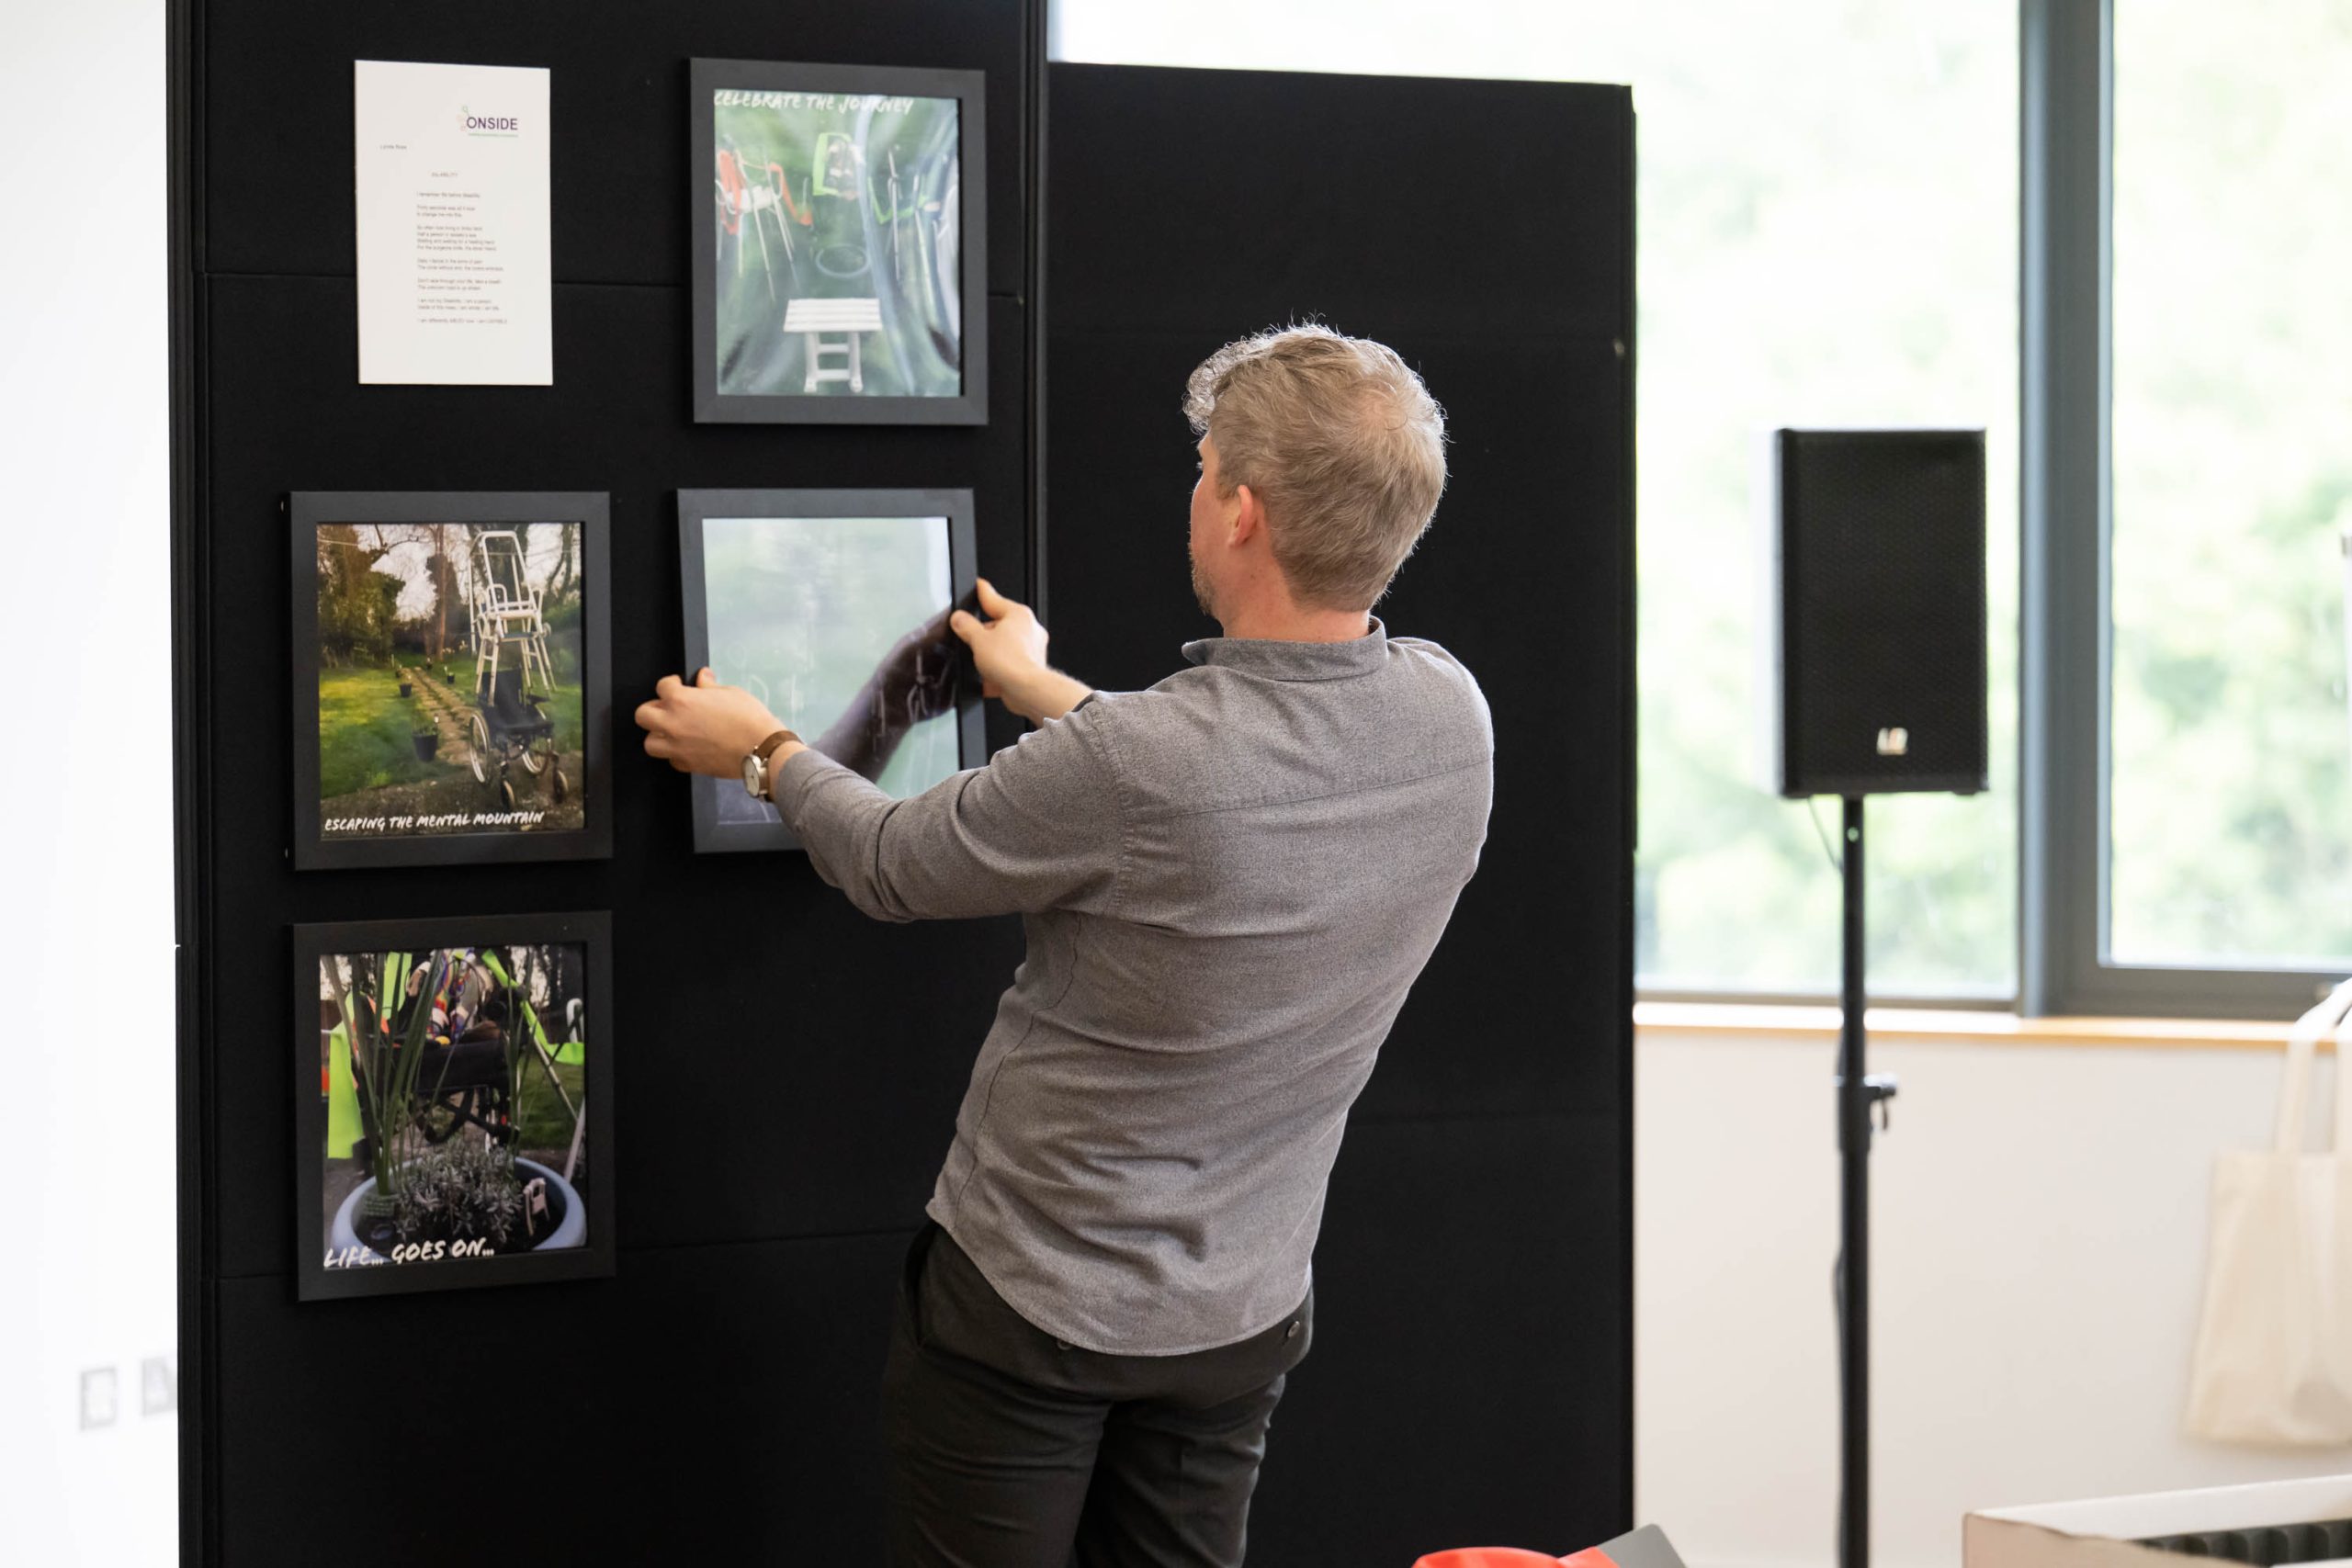 The photograph shows a man aligning a photograph to add to a display of photographs that are displayed on a board.  